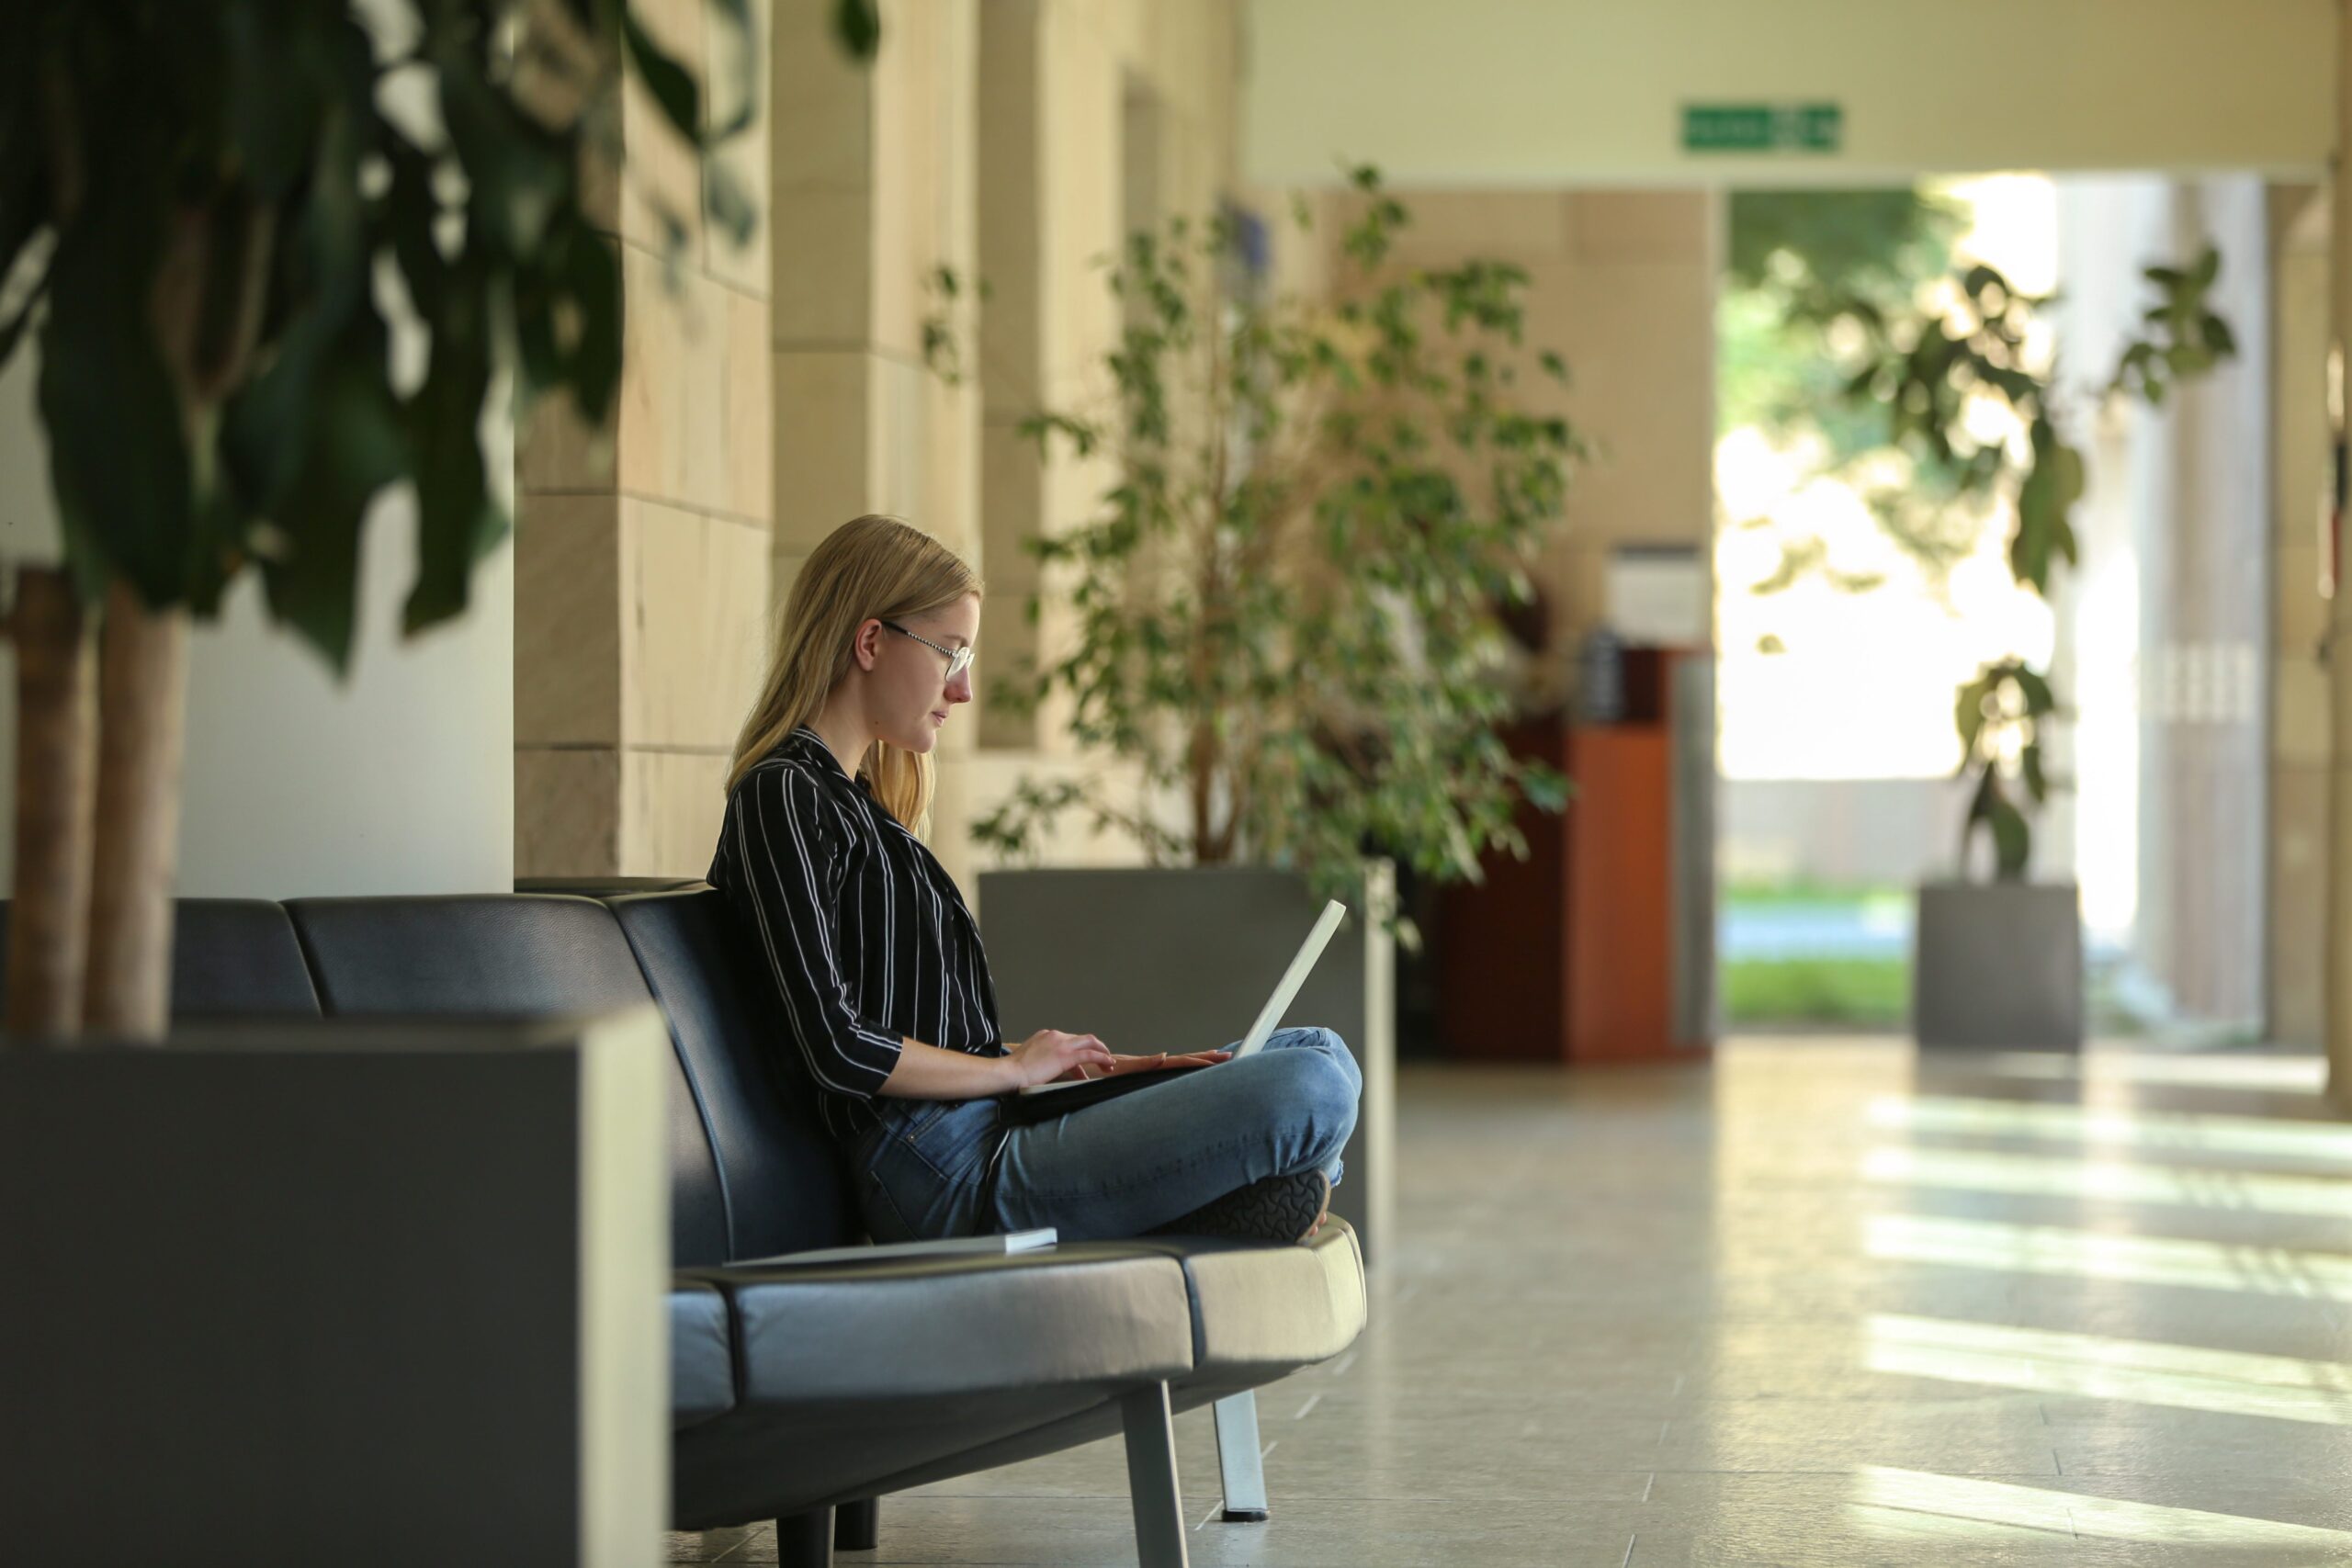 A student studying on campus